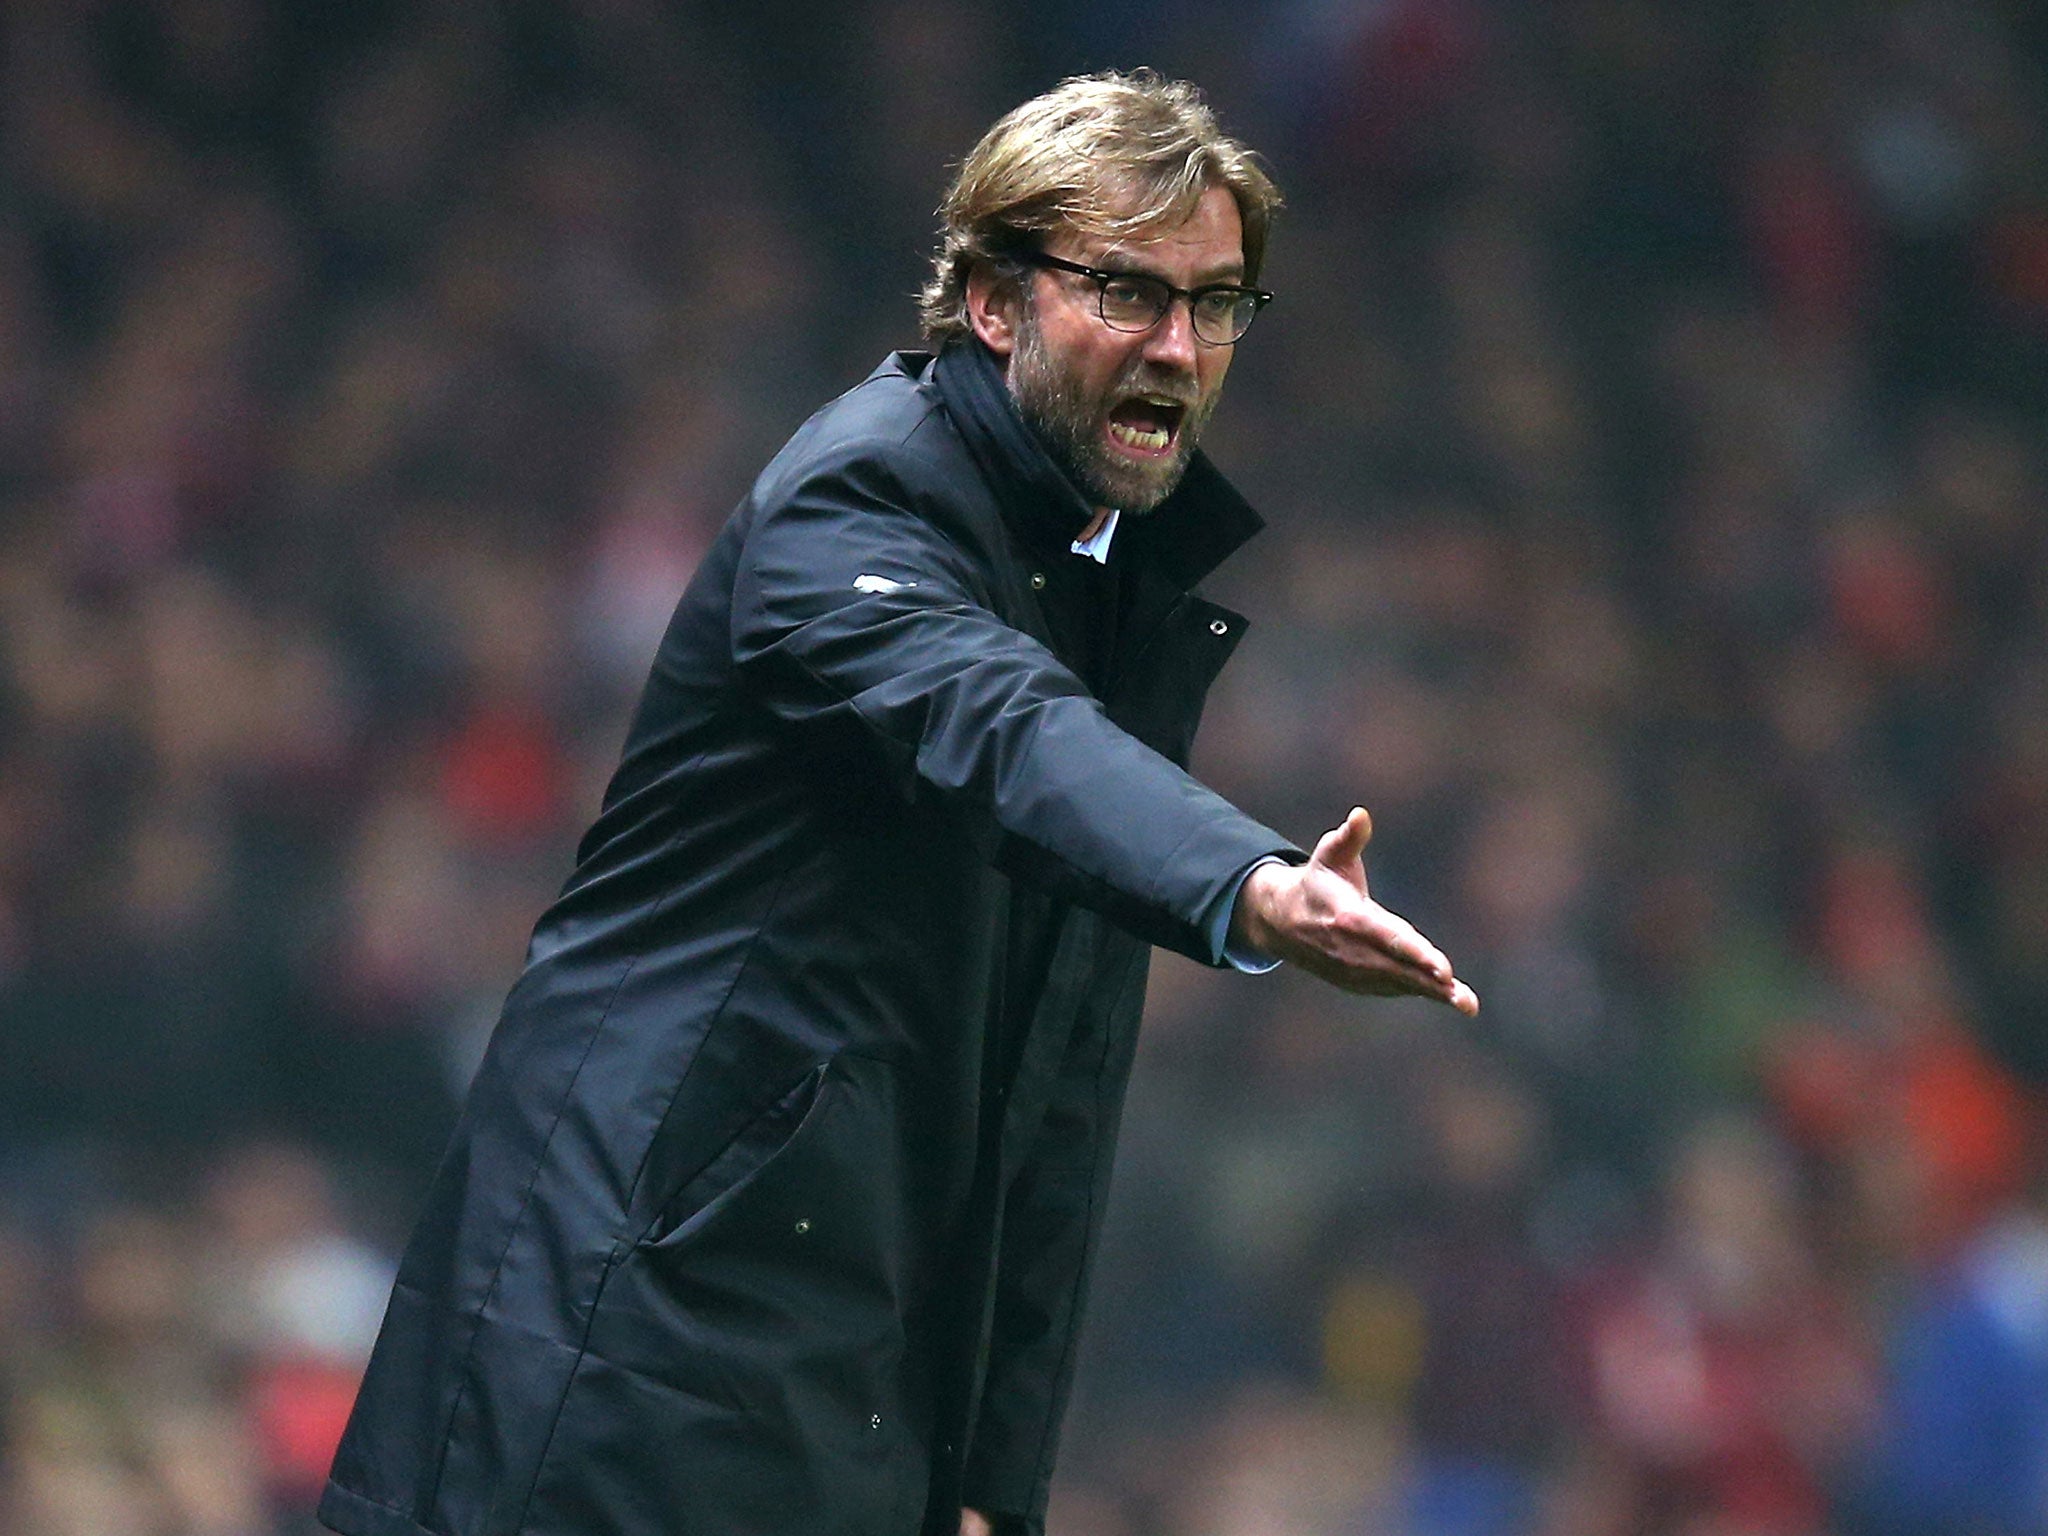 Klopp gesticulates to his under-performing players